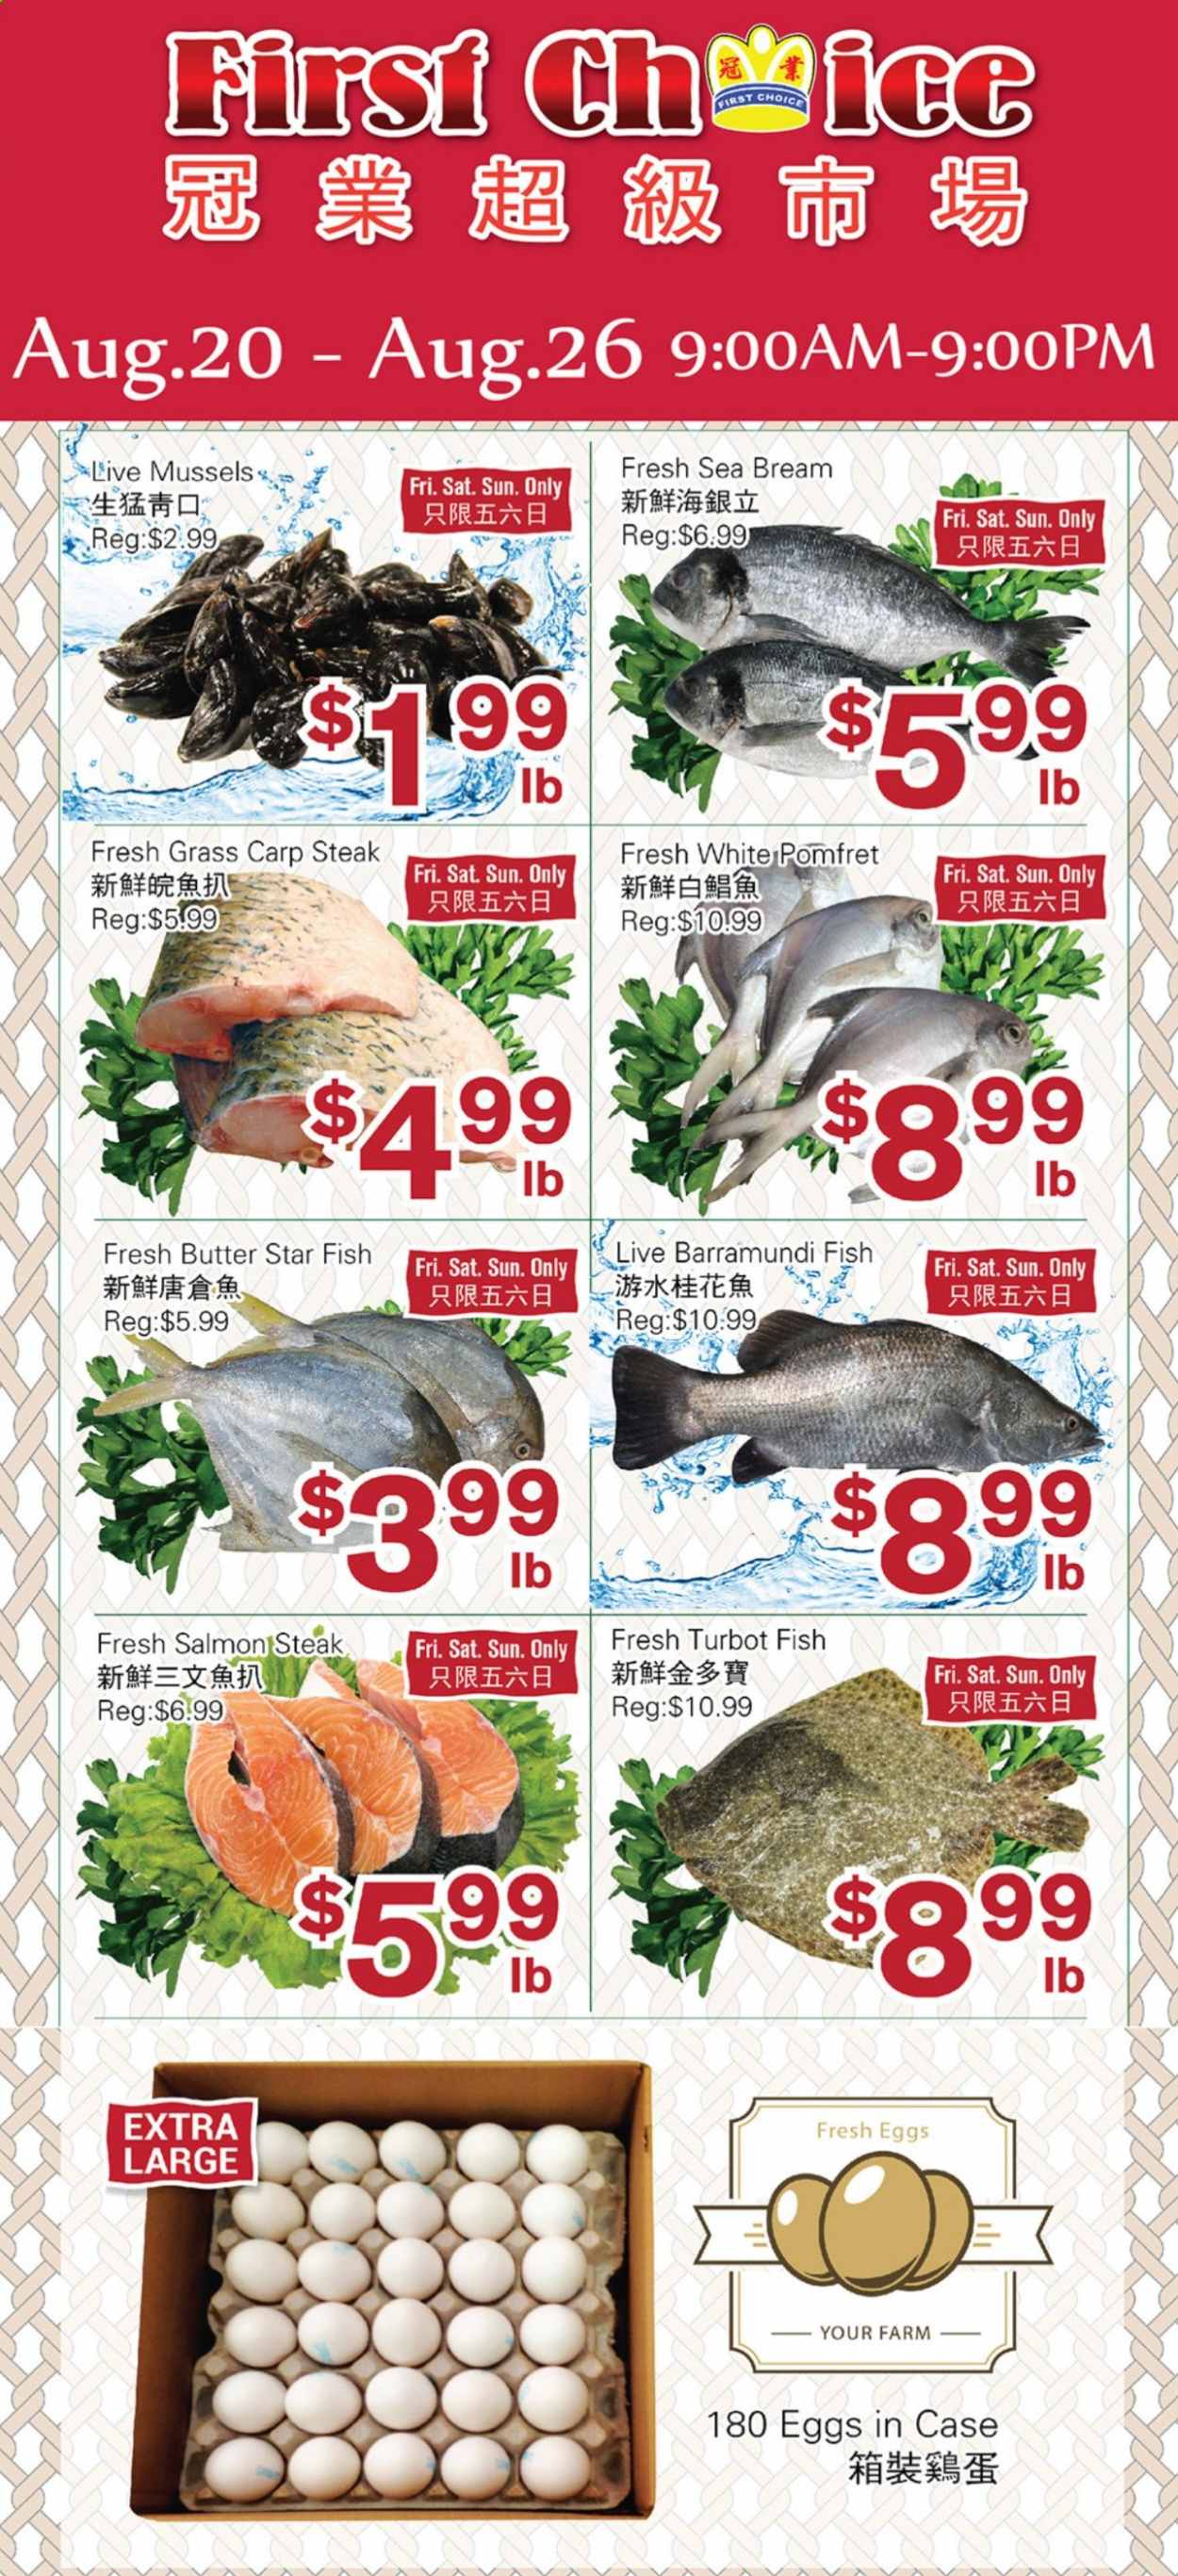 thumbnail - First Choice Supermarket Flyer - August 20, 2021 - August 26, 2021 - Sales products - barramundi, mussels, salmon, turbot, fish, seabream, carp, eggs, butter, steak. Page 1.